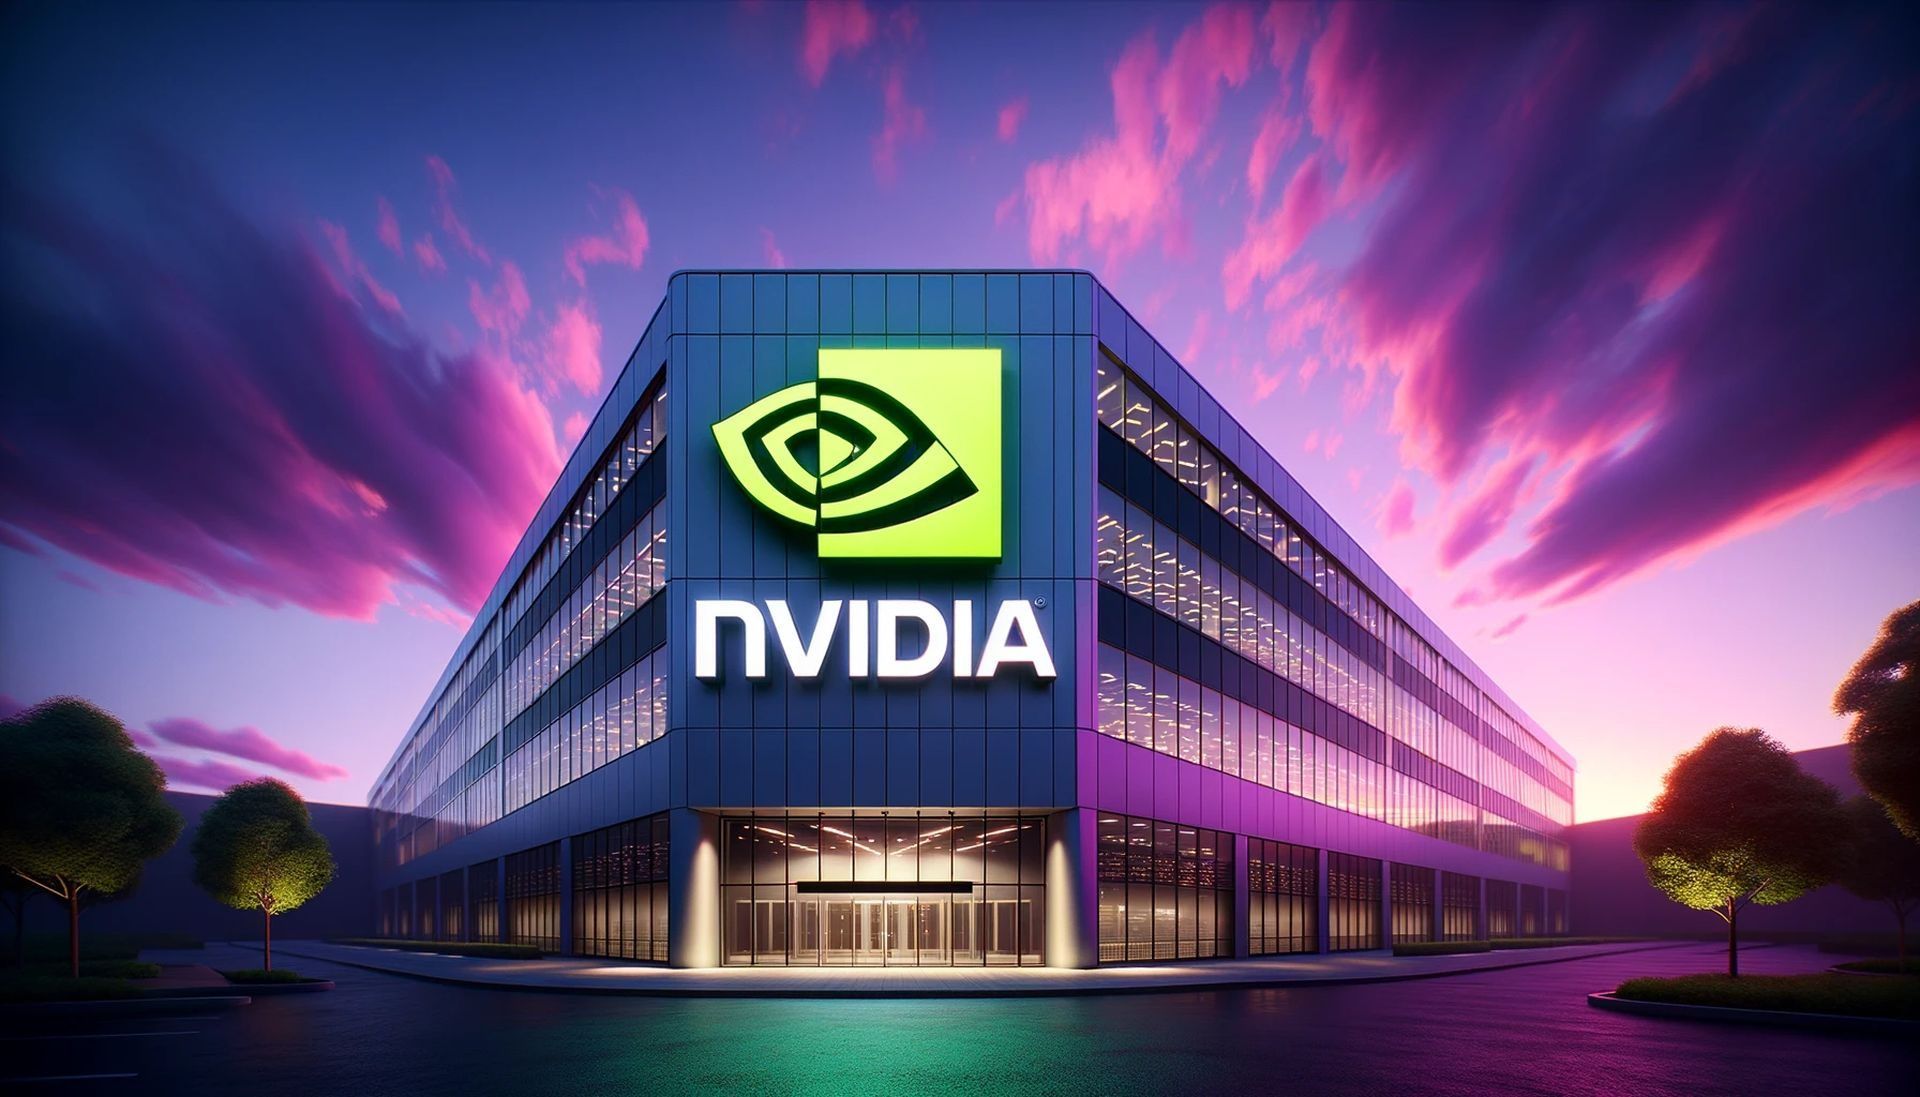 Nvidia and Foxconn's partnership for AI factories - revolutionizing manufacturing and AI applications for the future. Explore now!